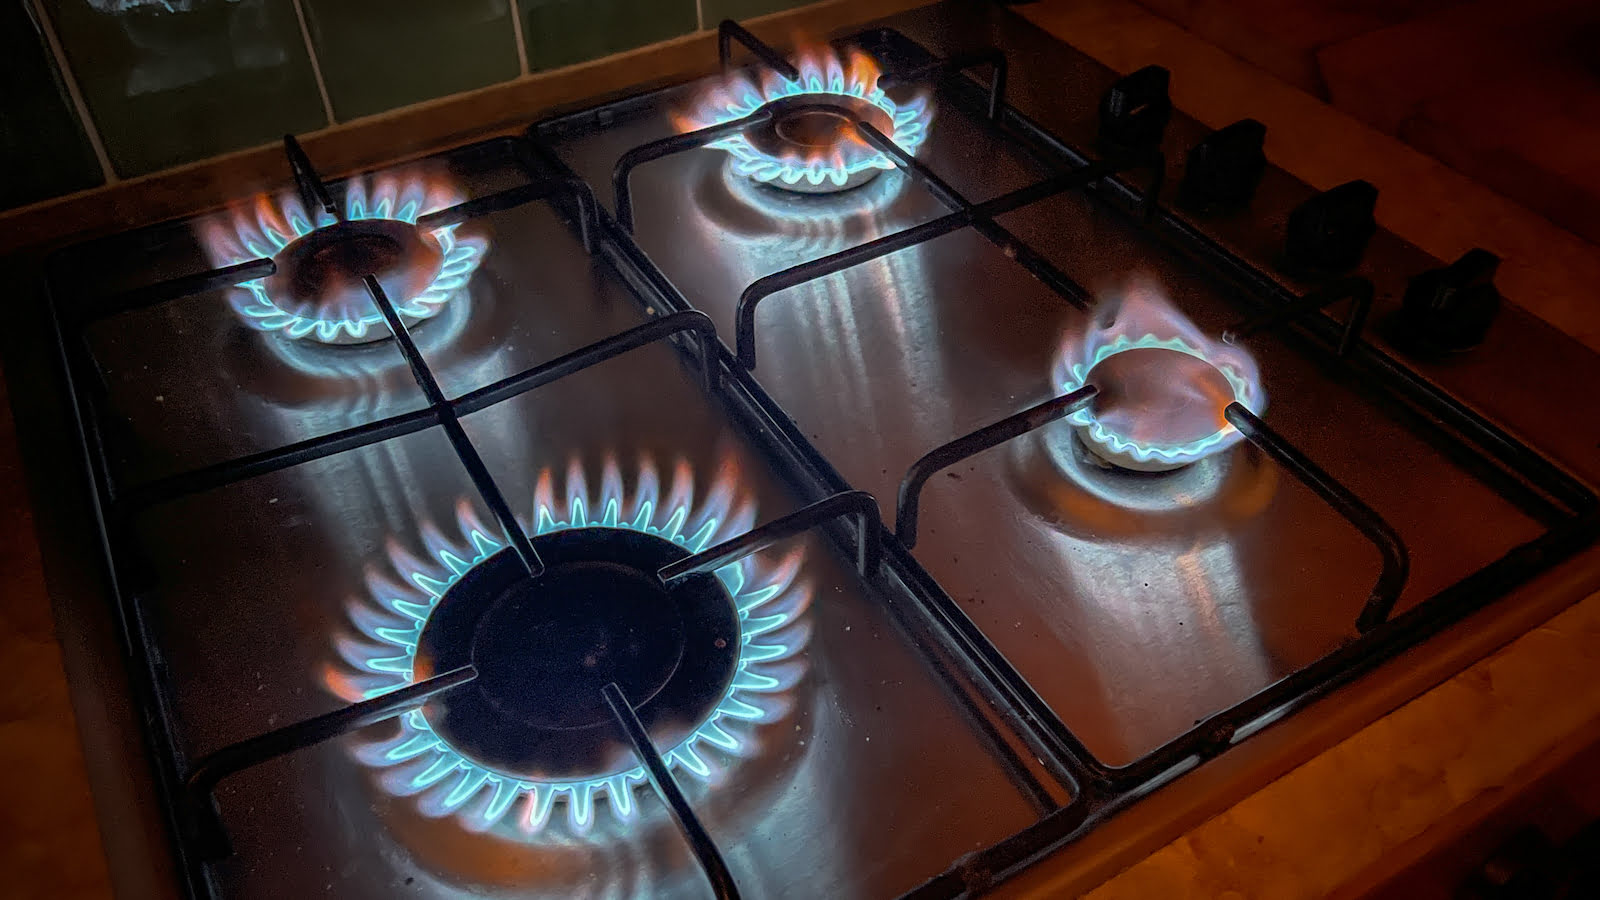 Gas Stove Not Getting Hot Enough? Here's How To Fix It - Fleet